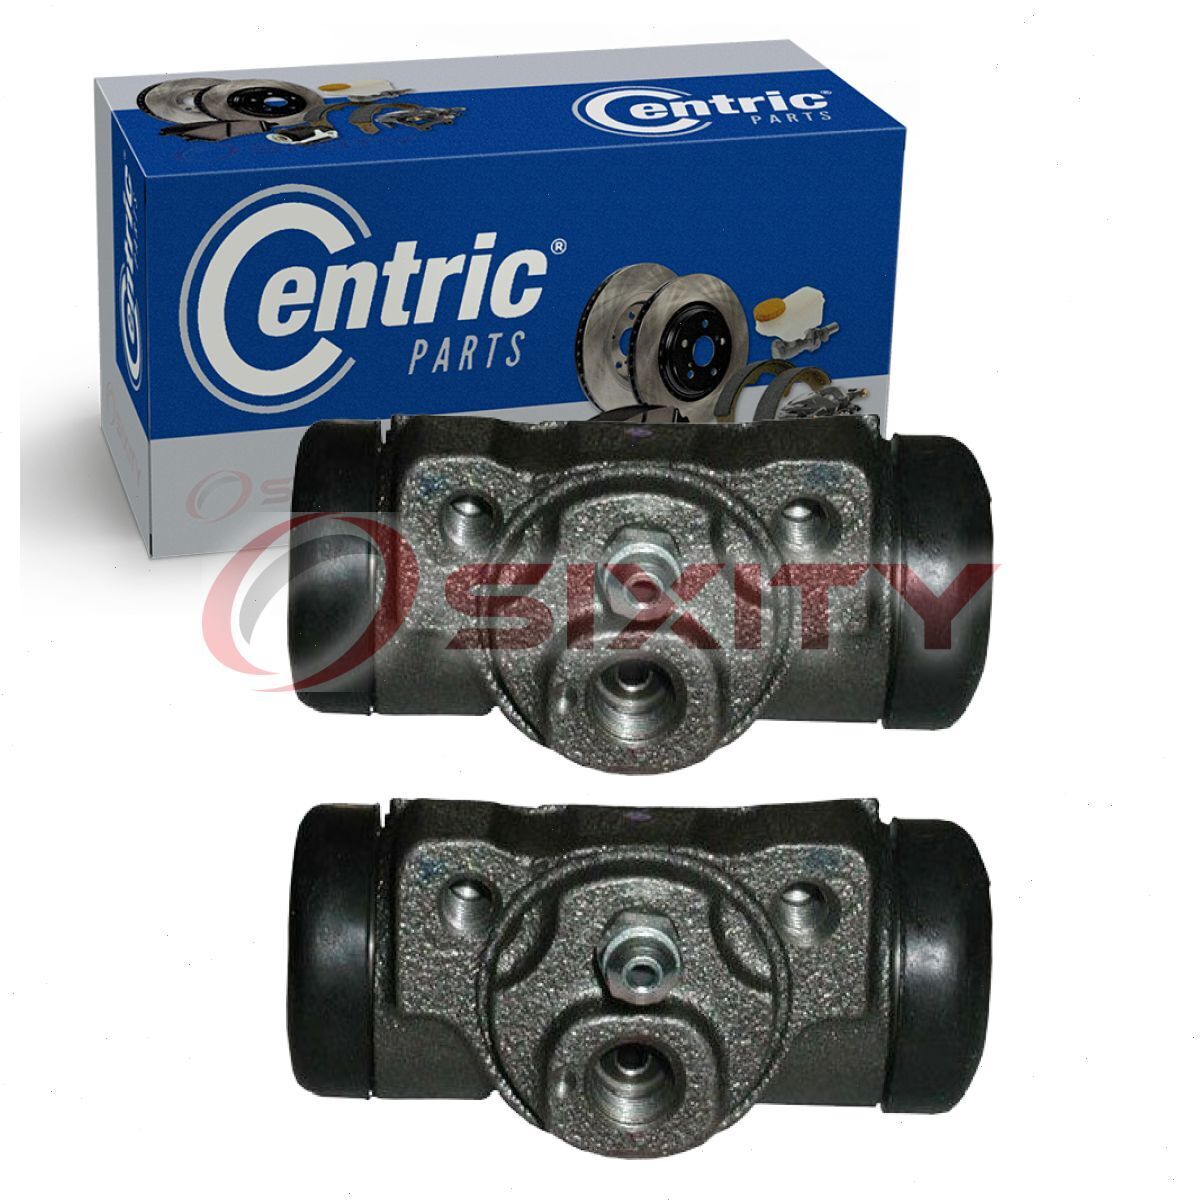 2 pc Centric Rear Drum Brake Wheel Cylinders for 1981-1982 Ford Granada vg